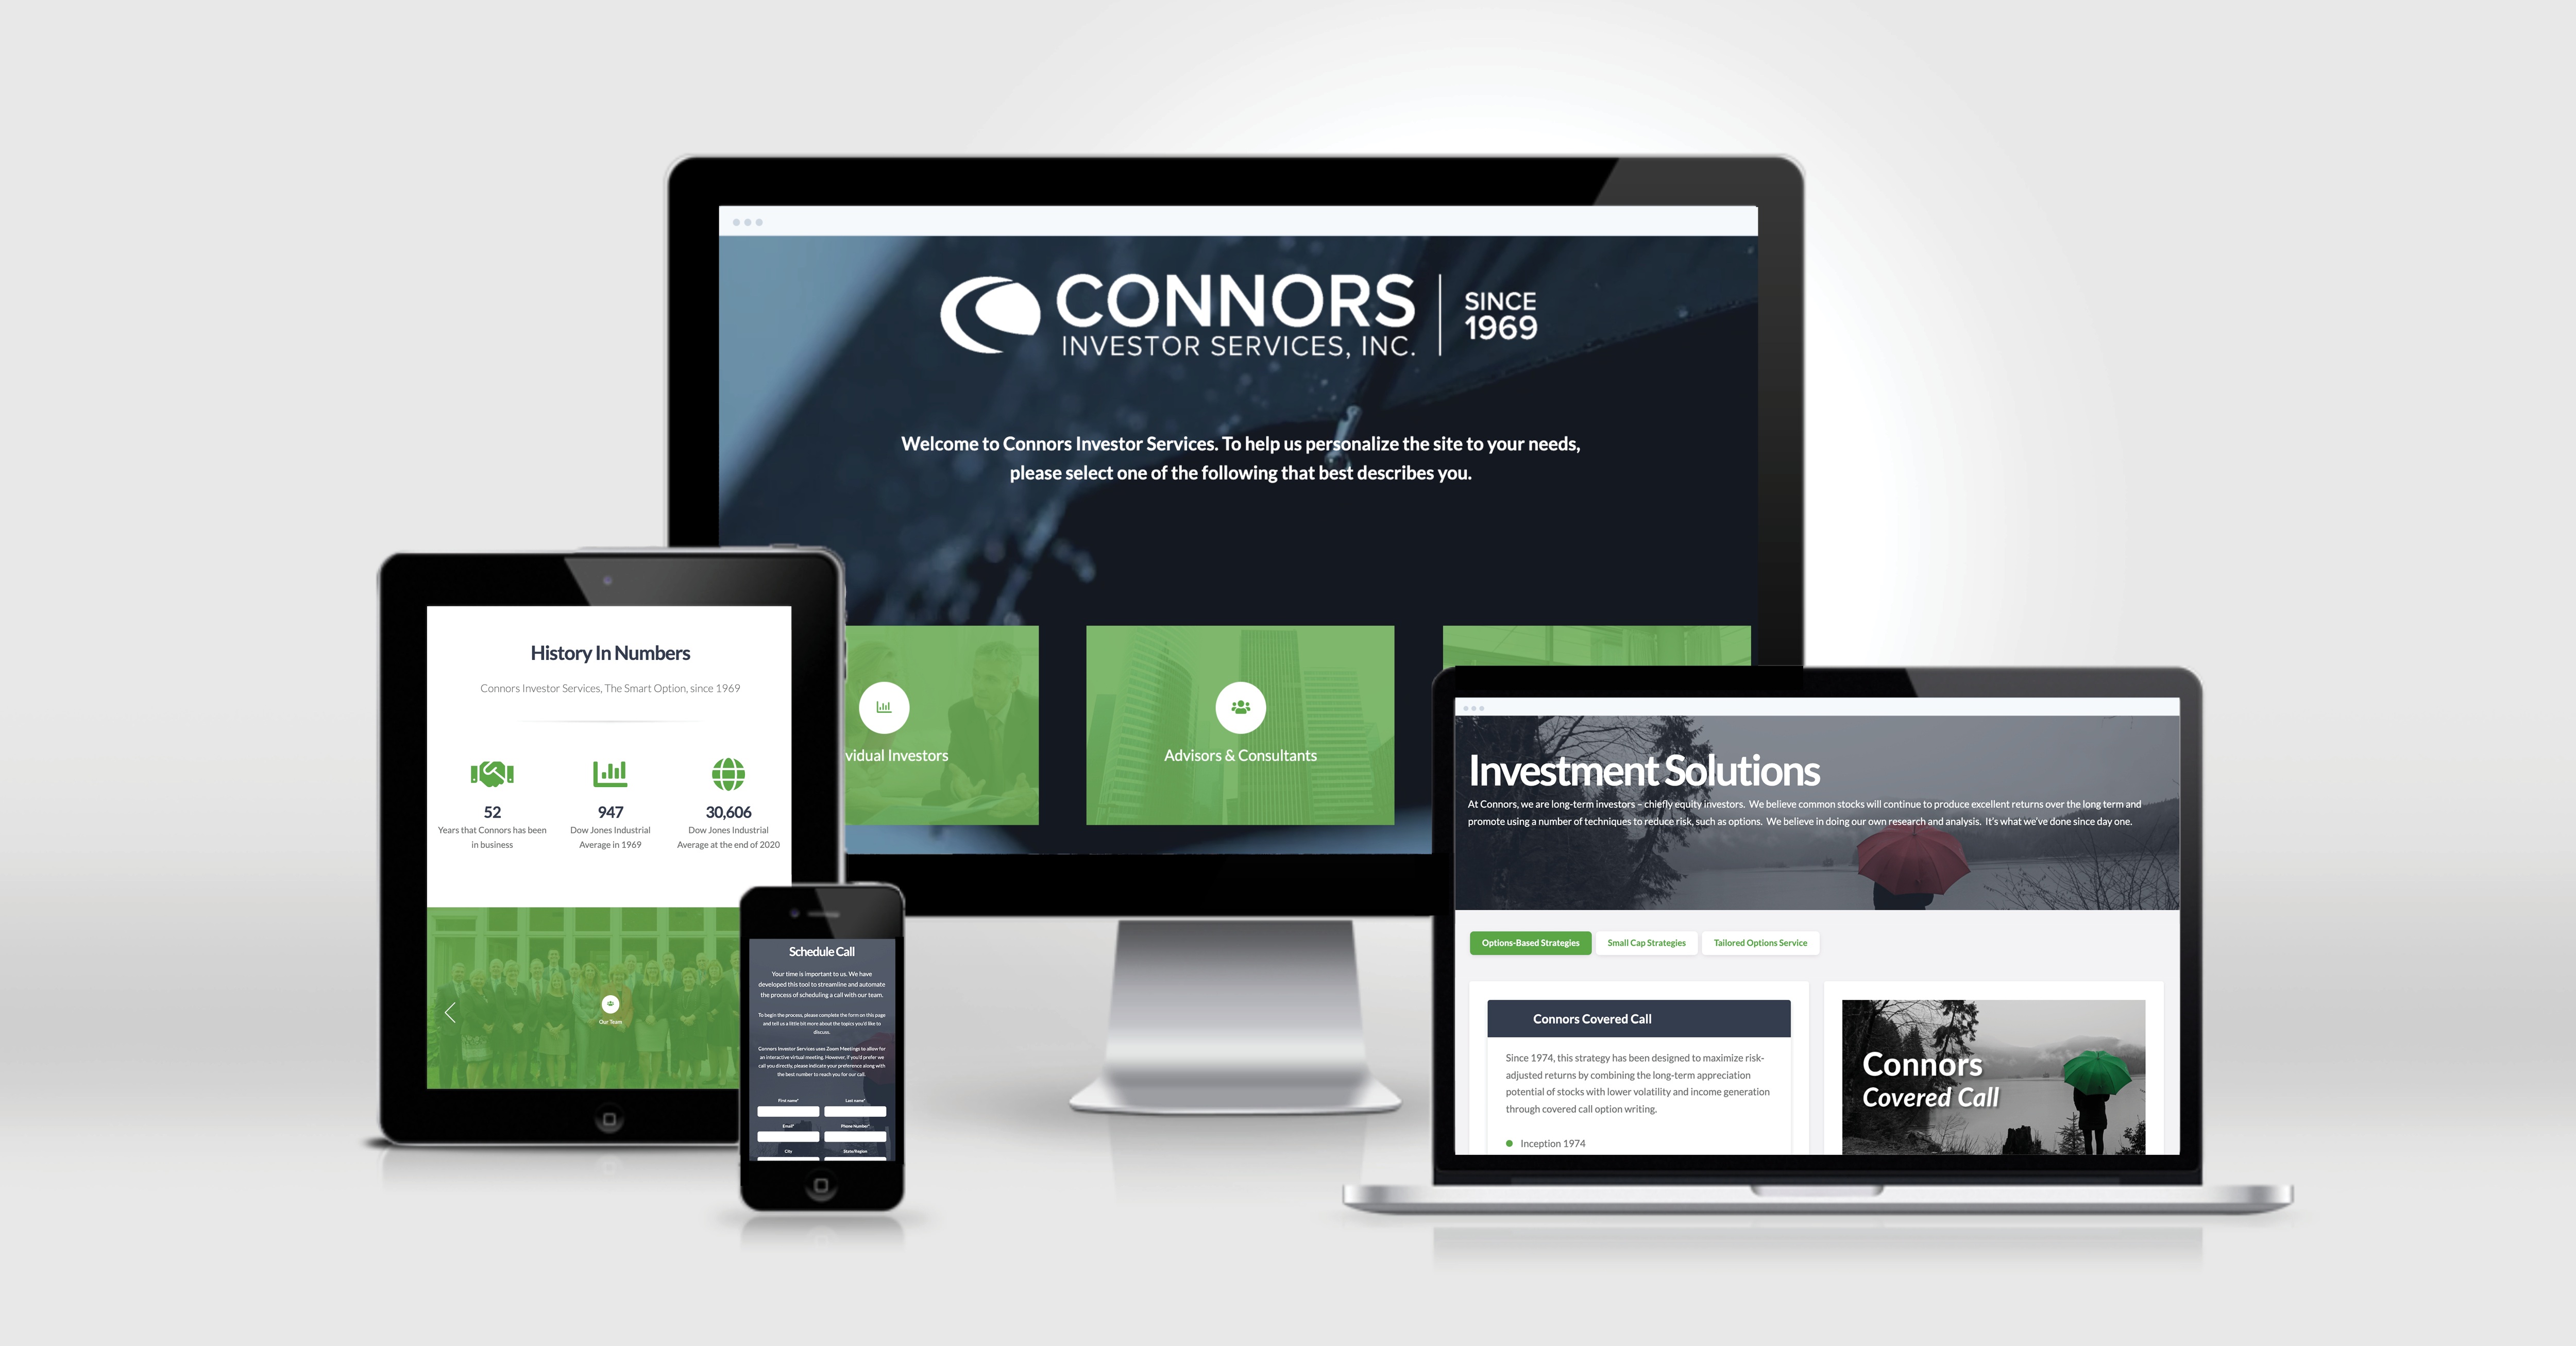 Announcing the Connors Investor Services New Redesigned Web Site!